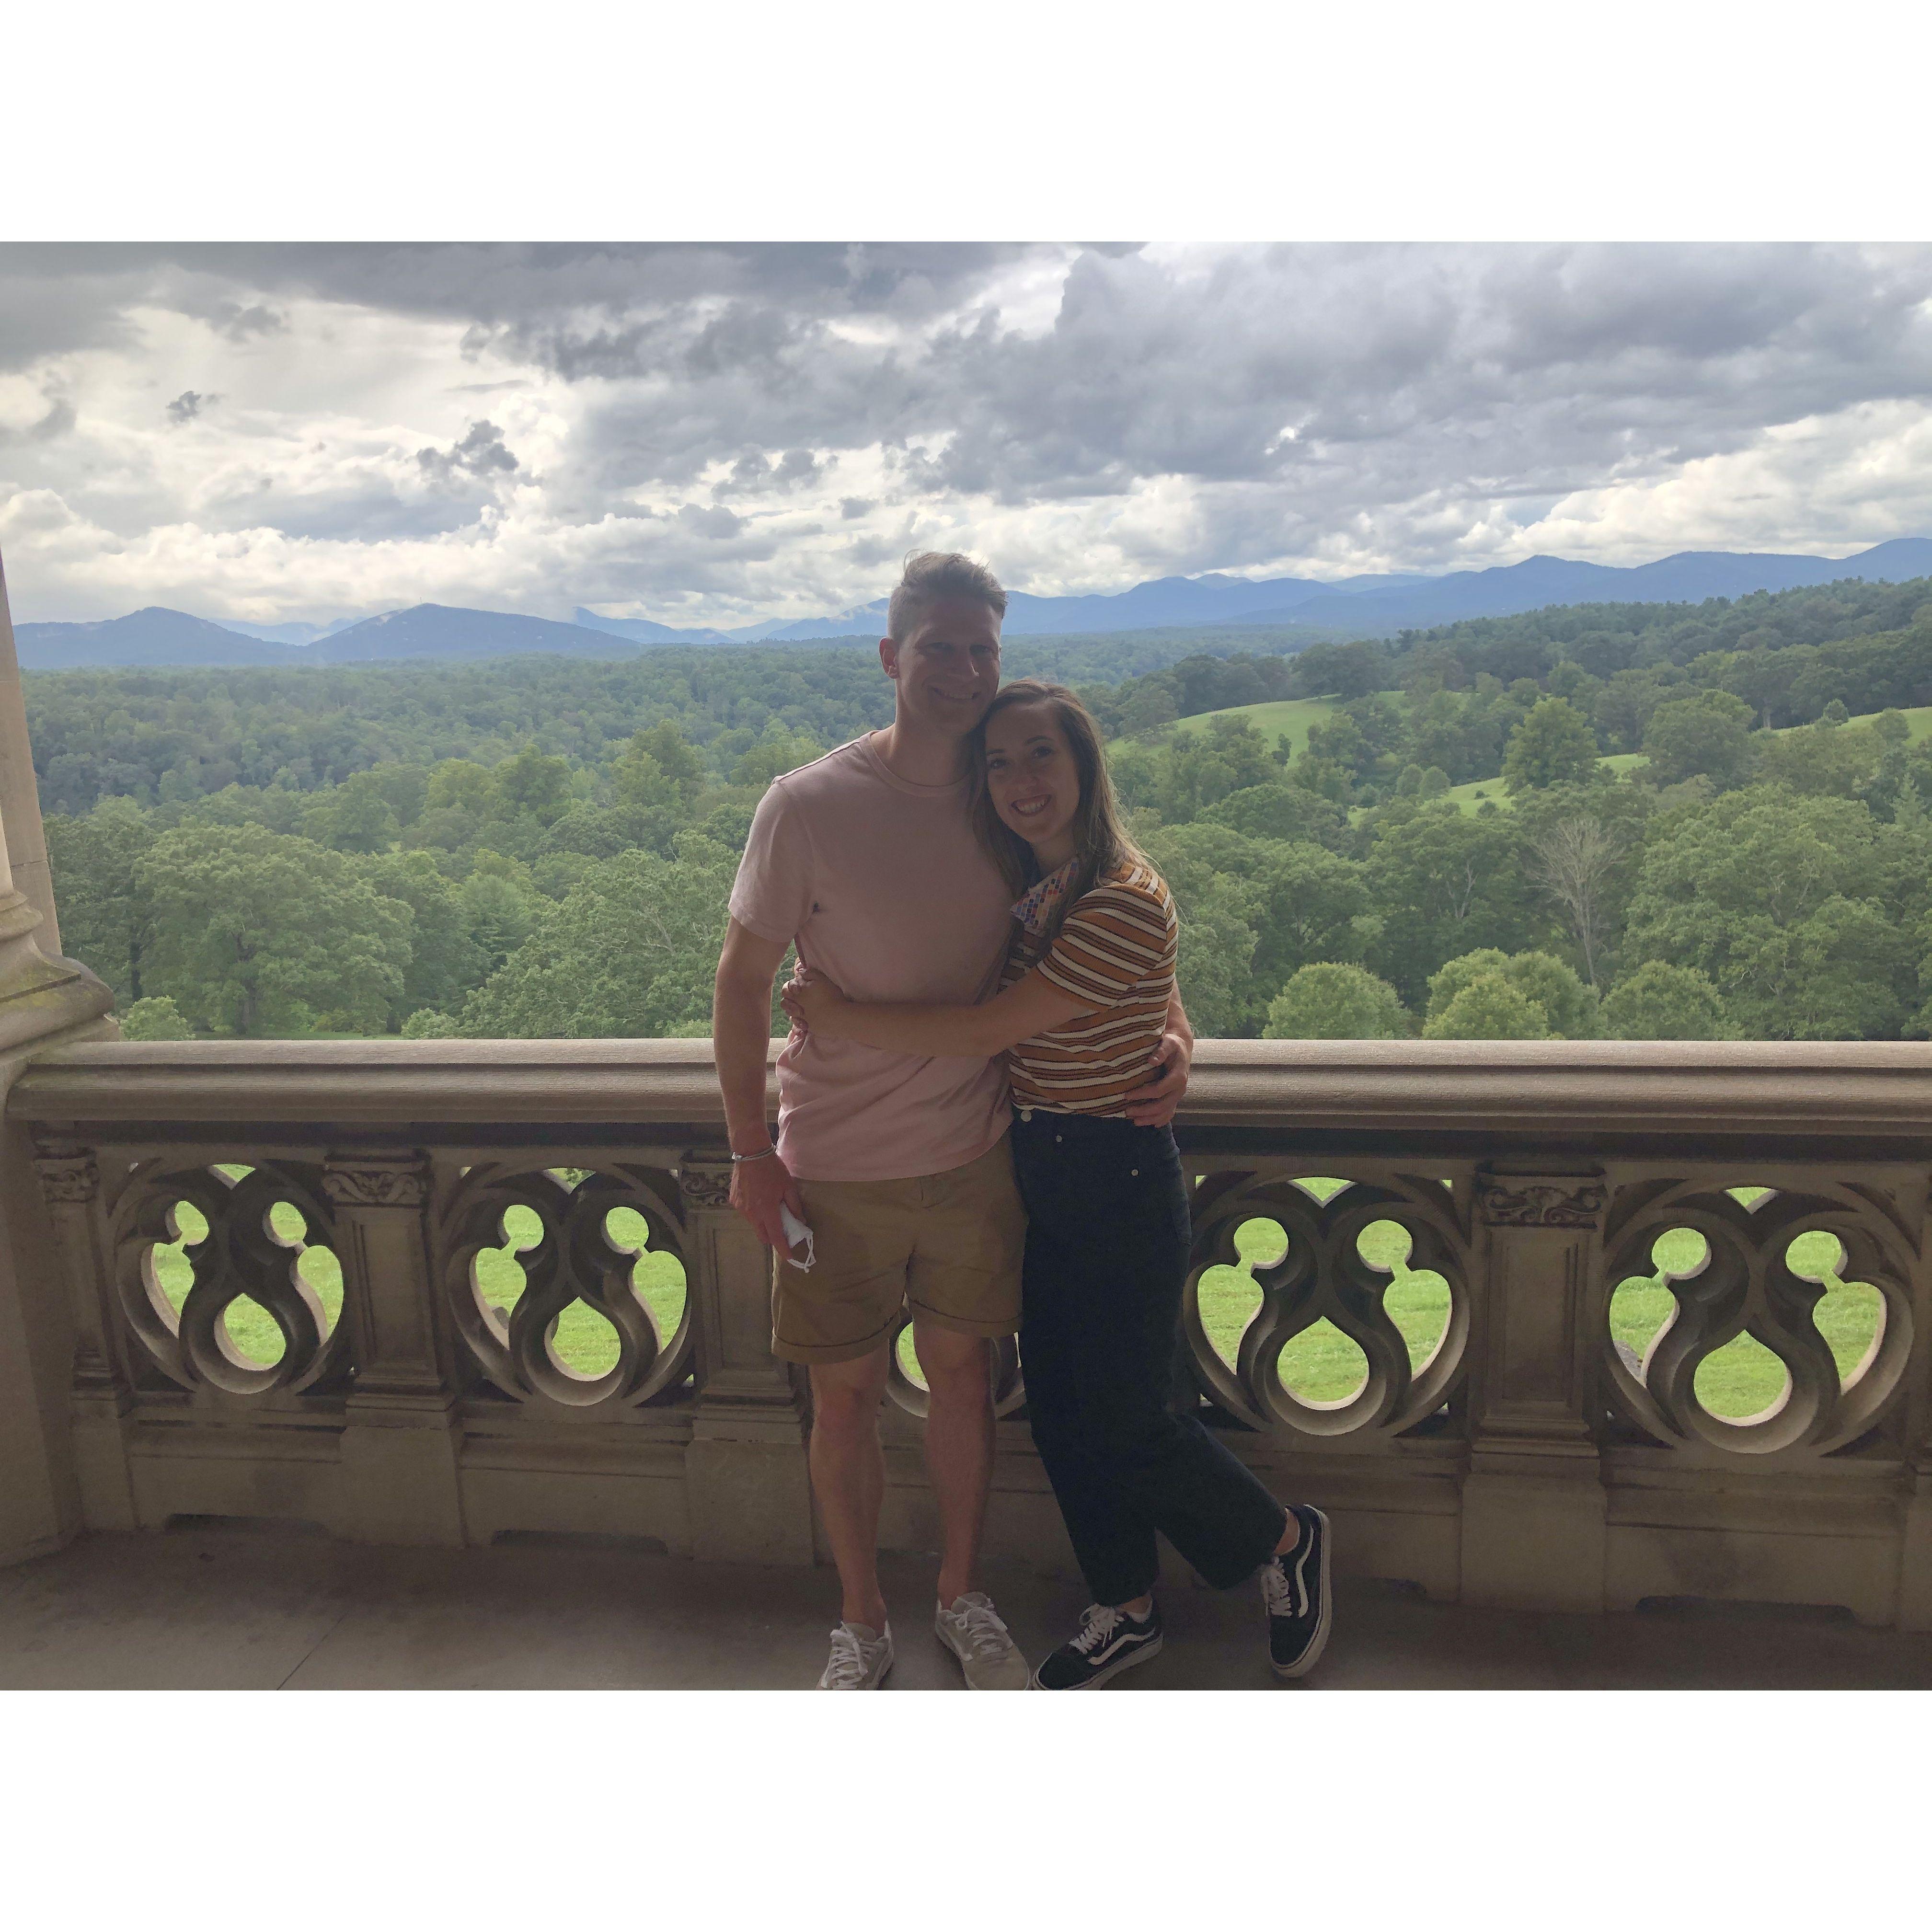 A & A visit Asheville, North Carolina. Amanda is VERY inspired by the Biltmore. September 2020